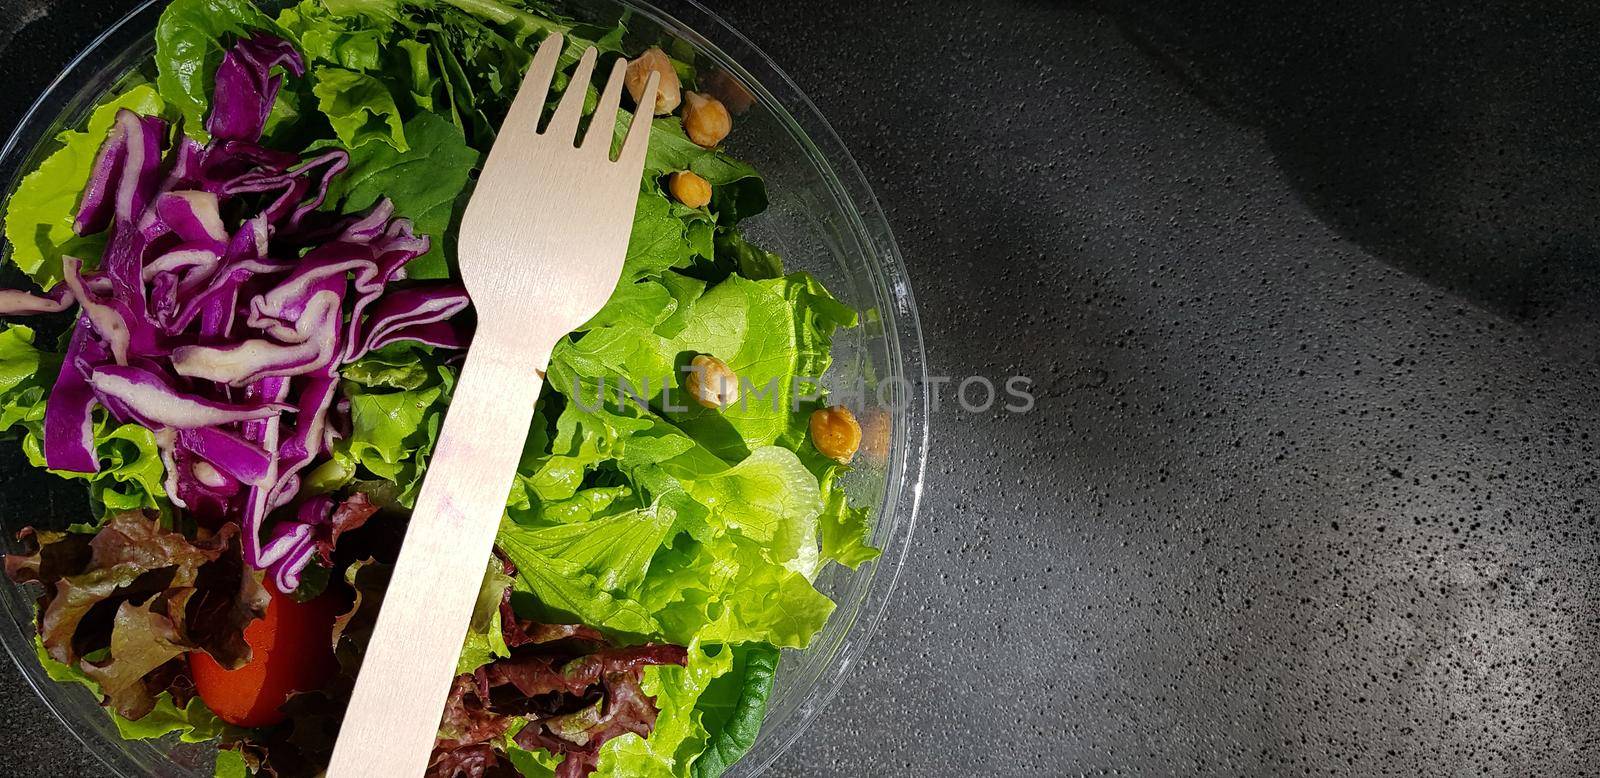 Healthy vegetable salad of fresh tomato, lettuce and red cabbage with wooden spoon and caesar salad dressing Diet menu Top view